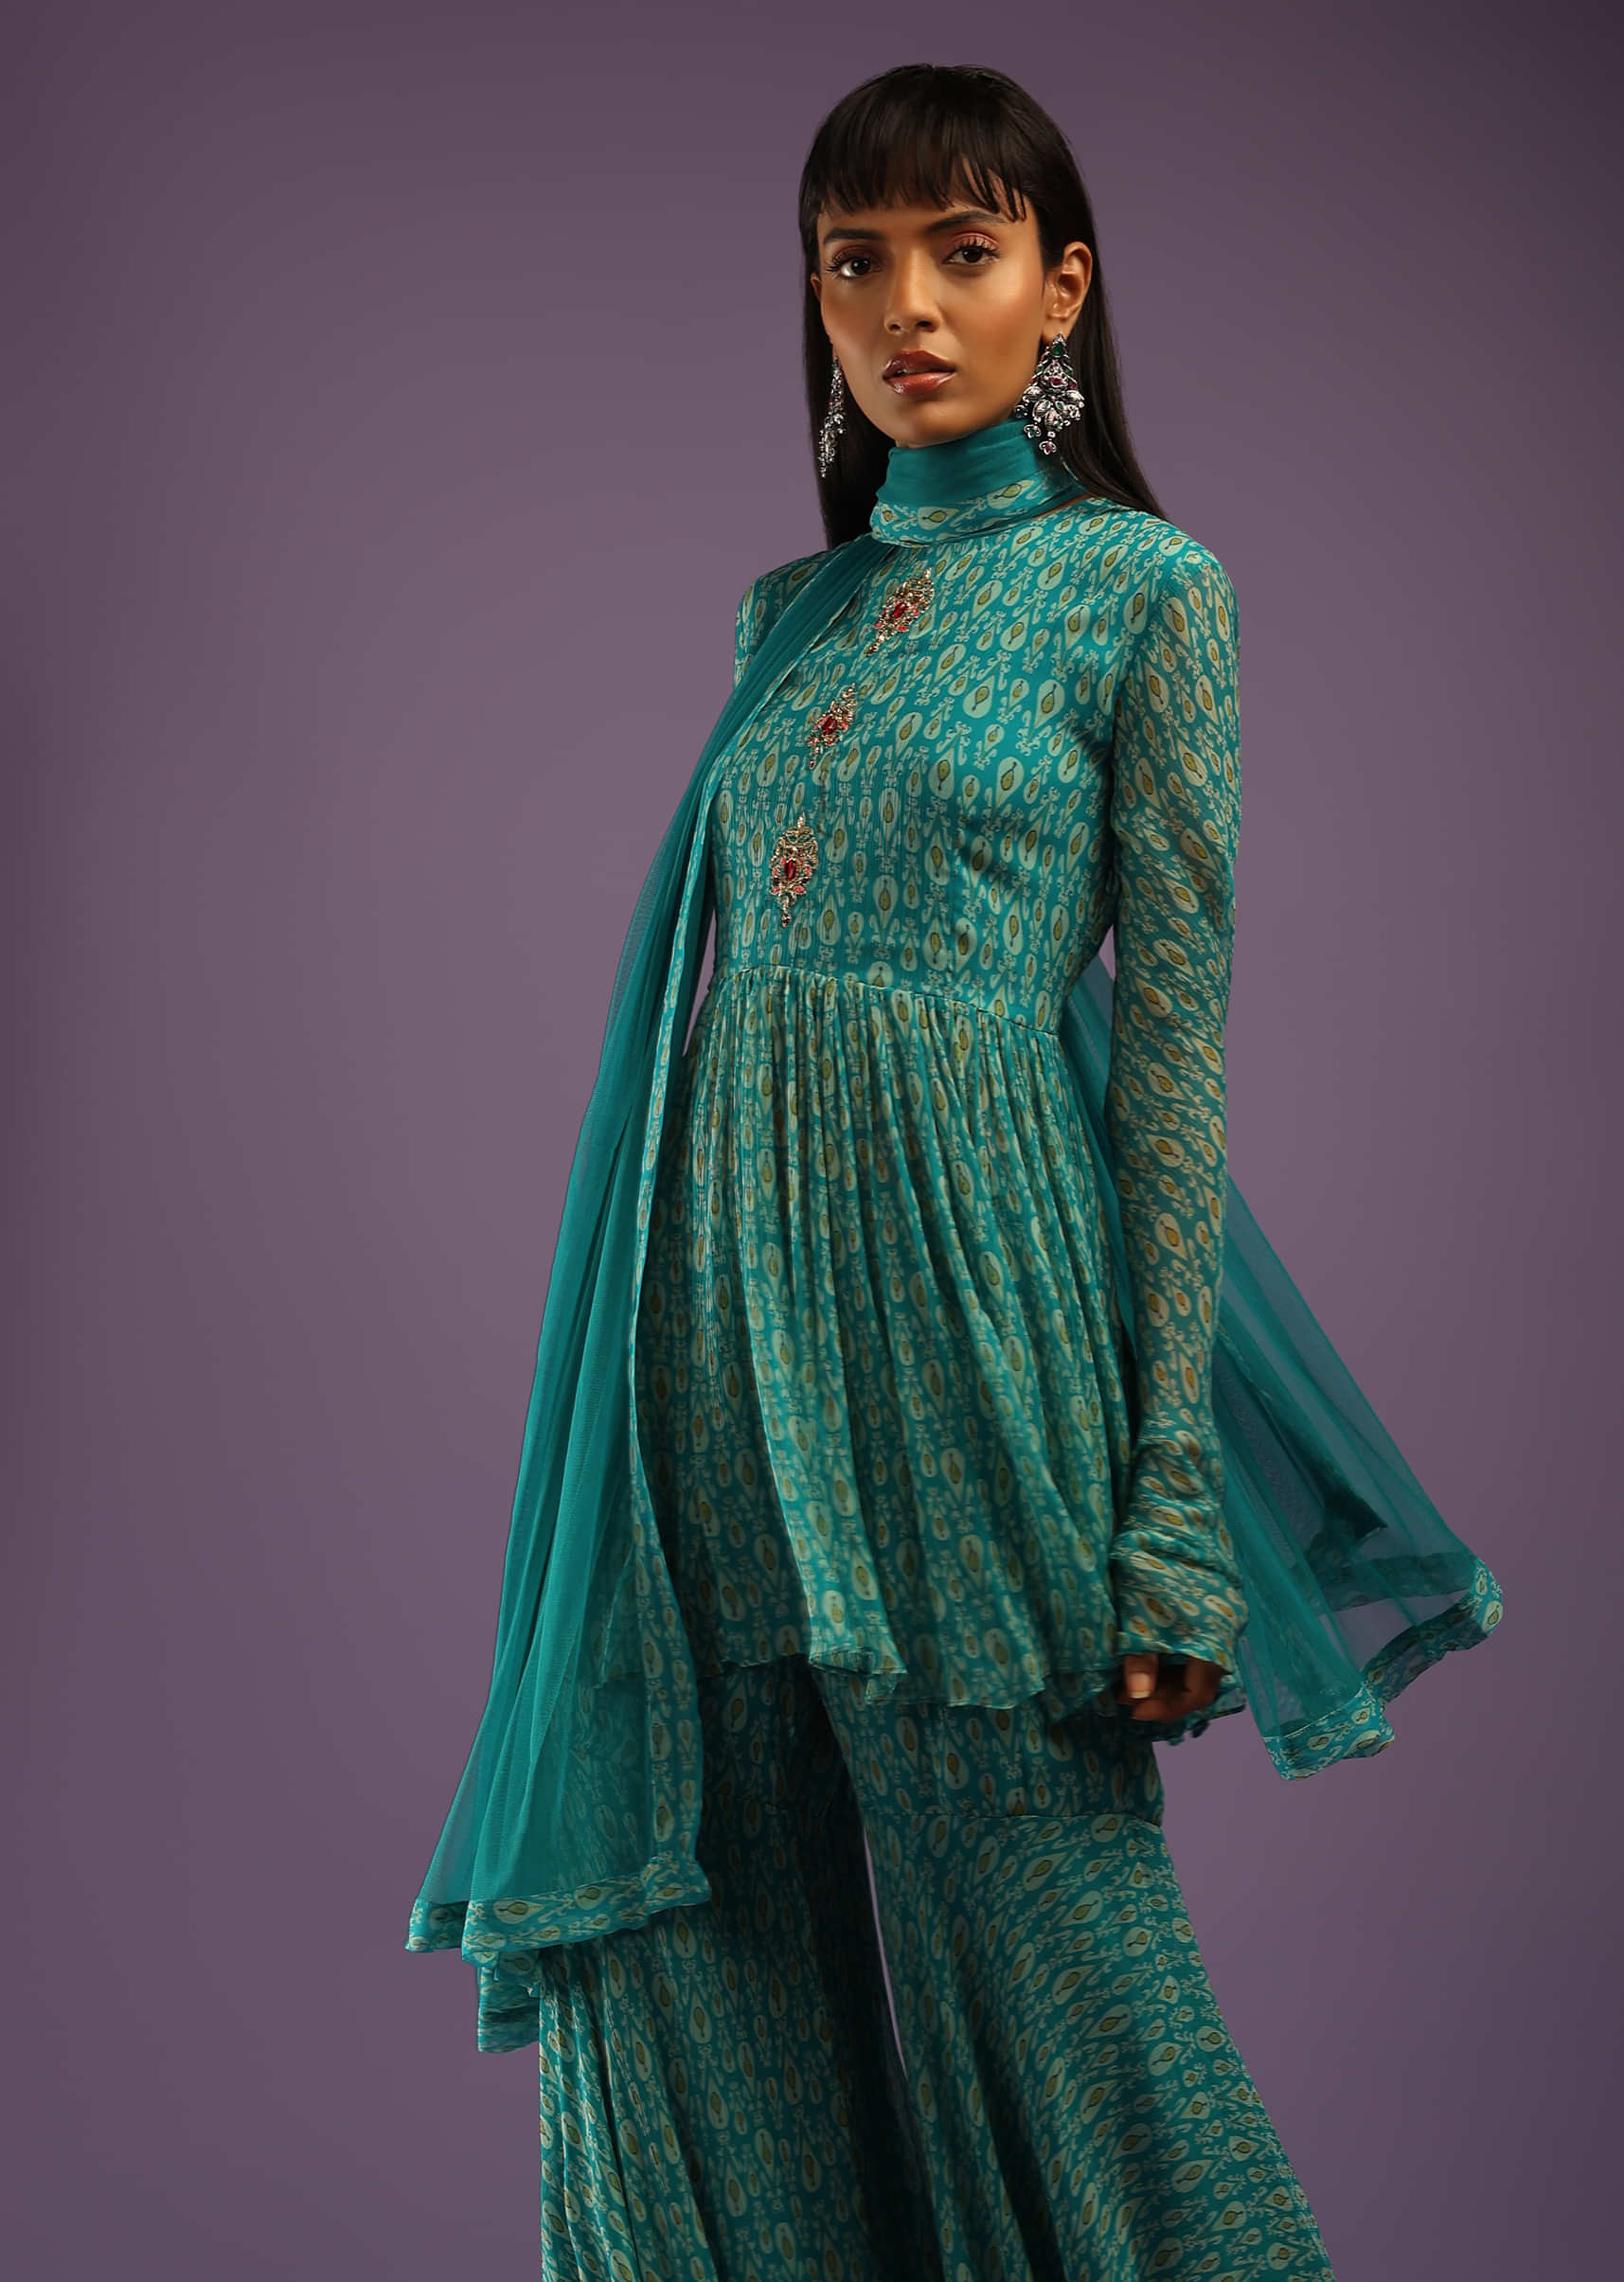 Teal Blue Sharara Suit In Georgette With All Over Print And Churidar Sleeves  